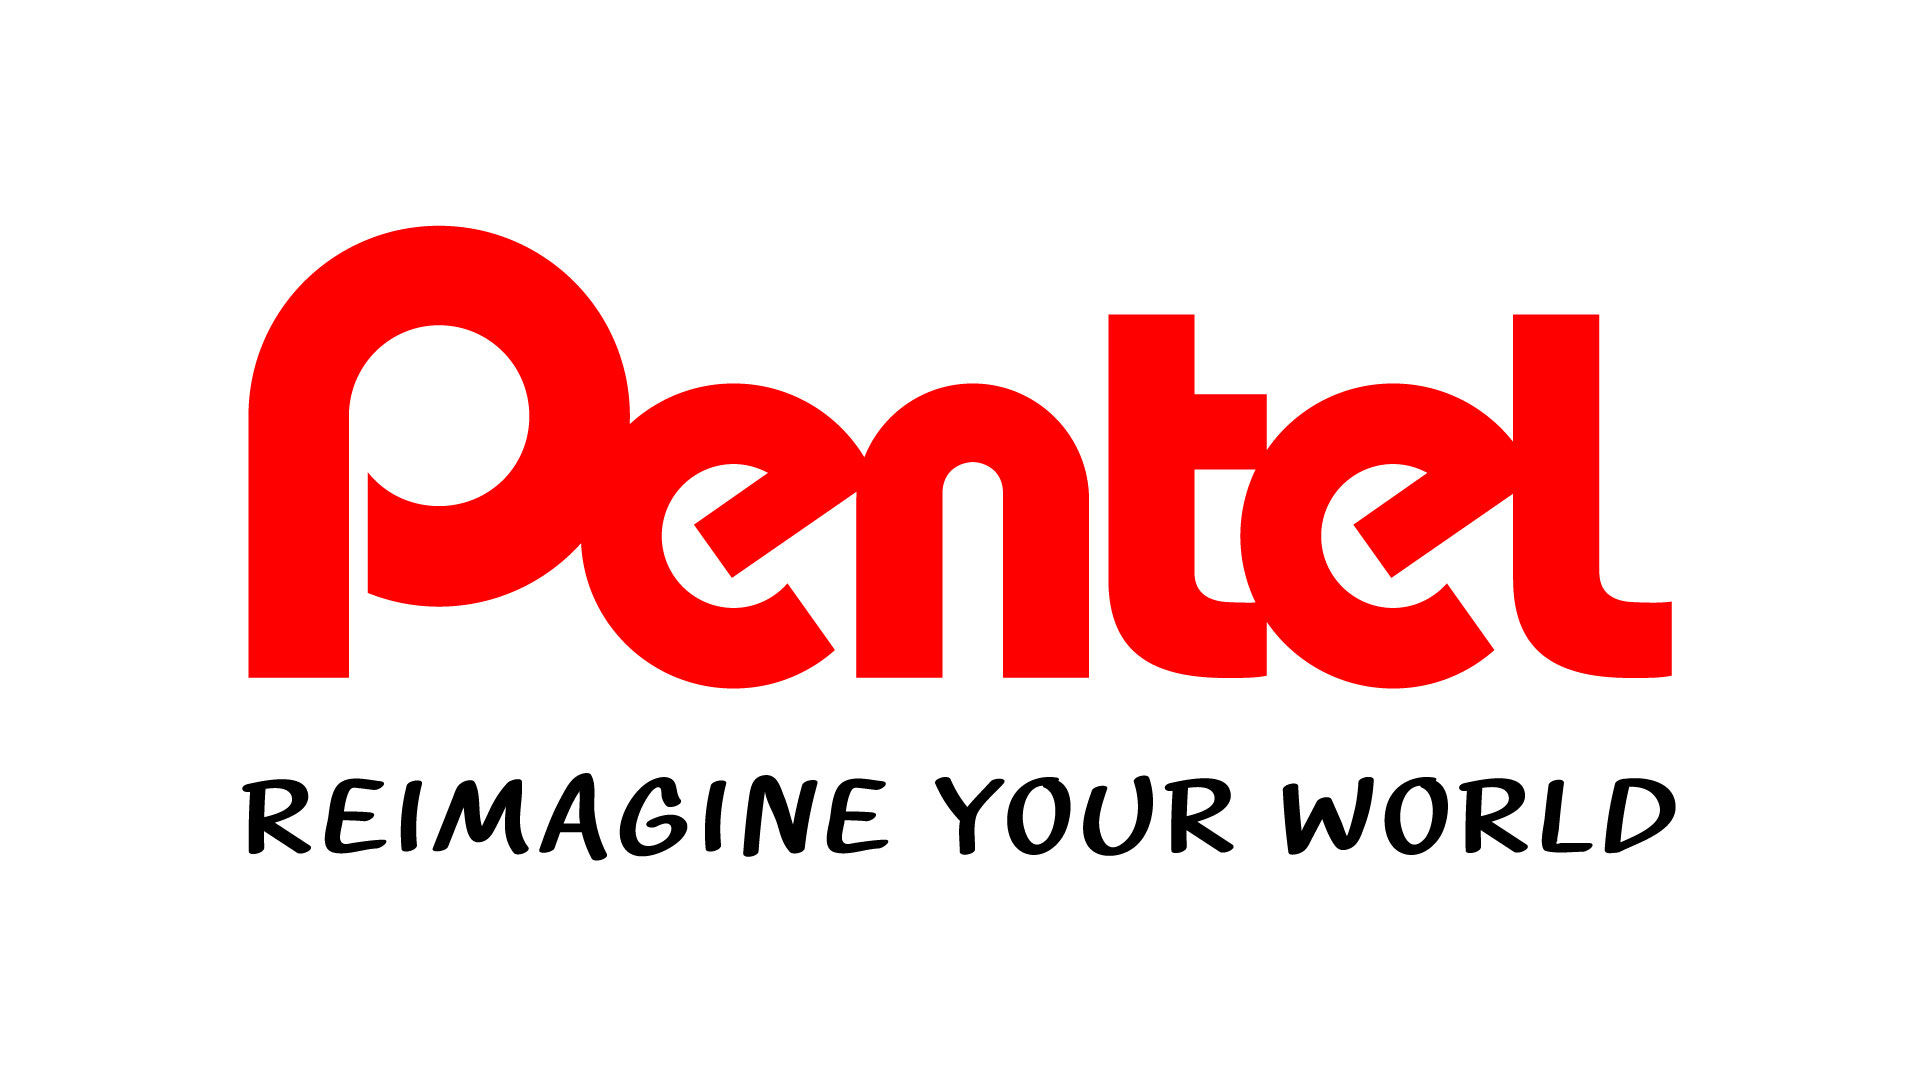 On 77th Anniversary of its Founding, Pentel Releases its New Tagline  Reimagine your world